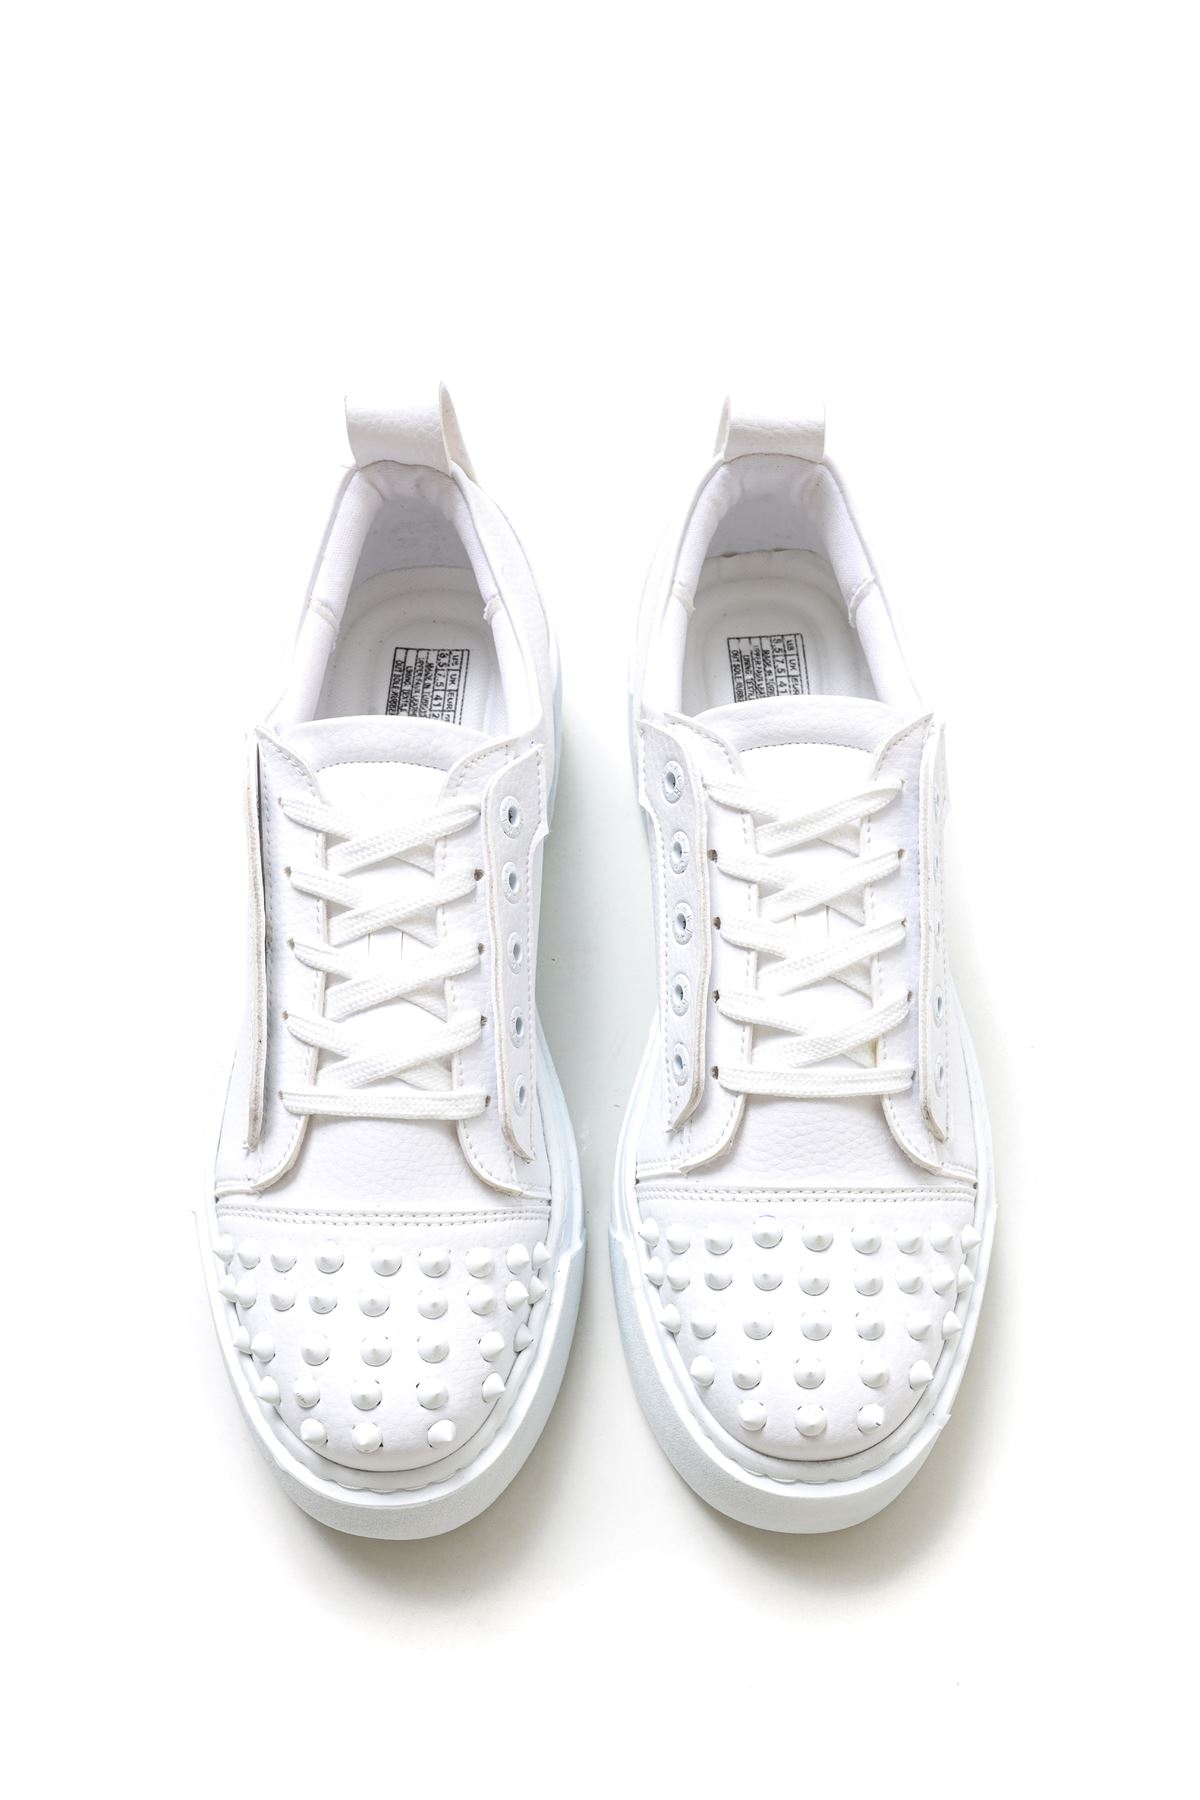 Chekich Men's Shoes White Color Lace-up Artificial Leather Studded Decor Cotton Lining Stitched Sole Unisex Sneakers CH169 BT